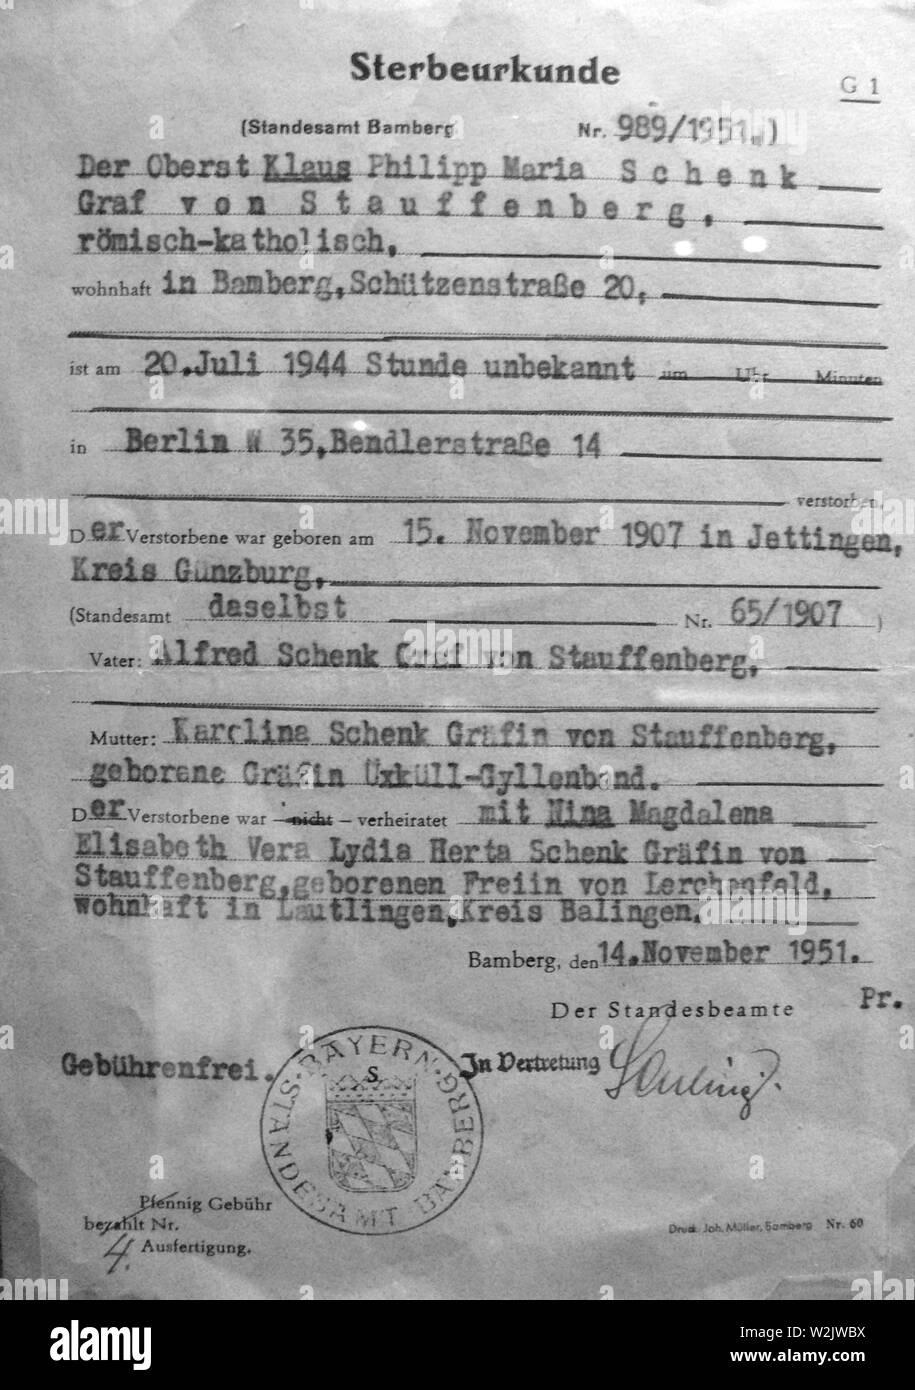 Claus von Stauffenberg death certificate issued in 1951, Claus Philipp Maria Schenk Graf von Stauffenberg (1907 – 1944) German army officer. Stauffenberg was one of the leading members of the failed 20 July plot of 1944 to assassinate Adolf Hitler, he was executed by firing squad shortly after the failed attempt known as Operation Valkyrie. Stock Photo